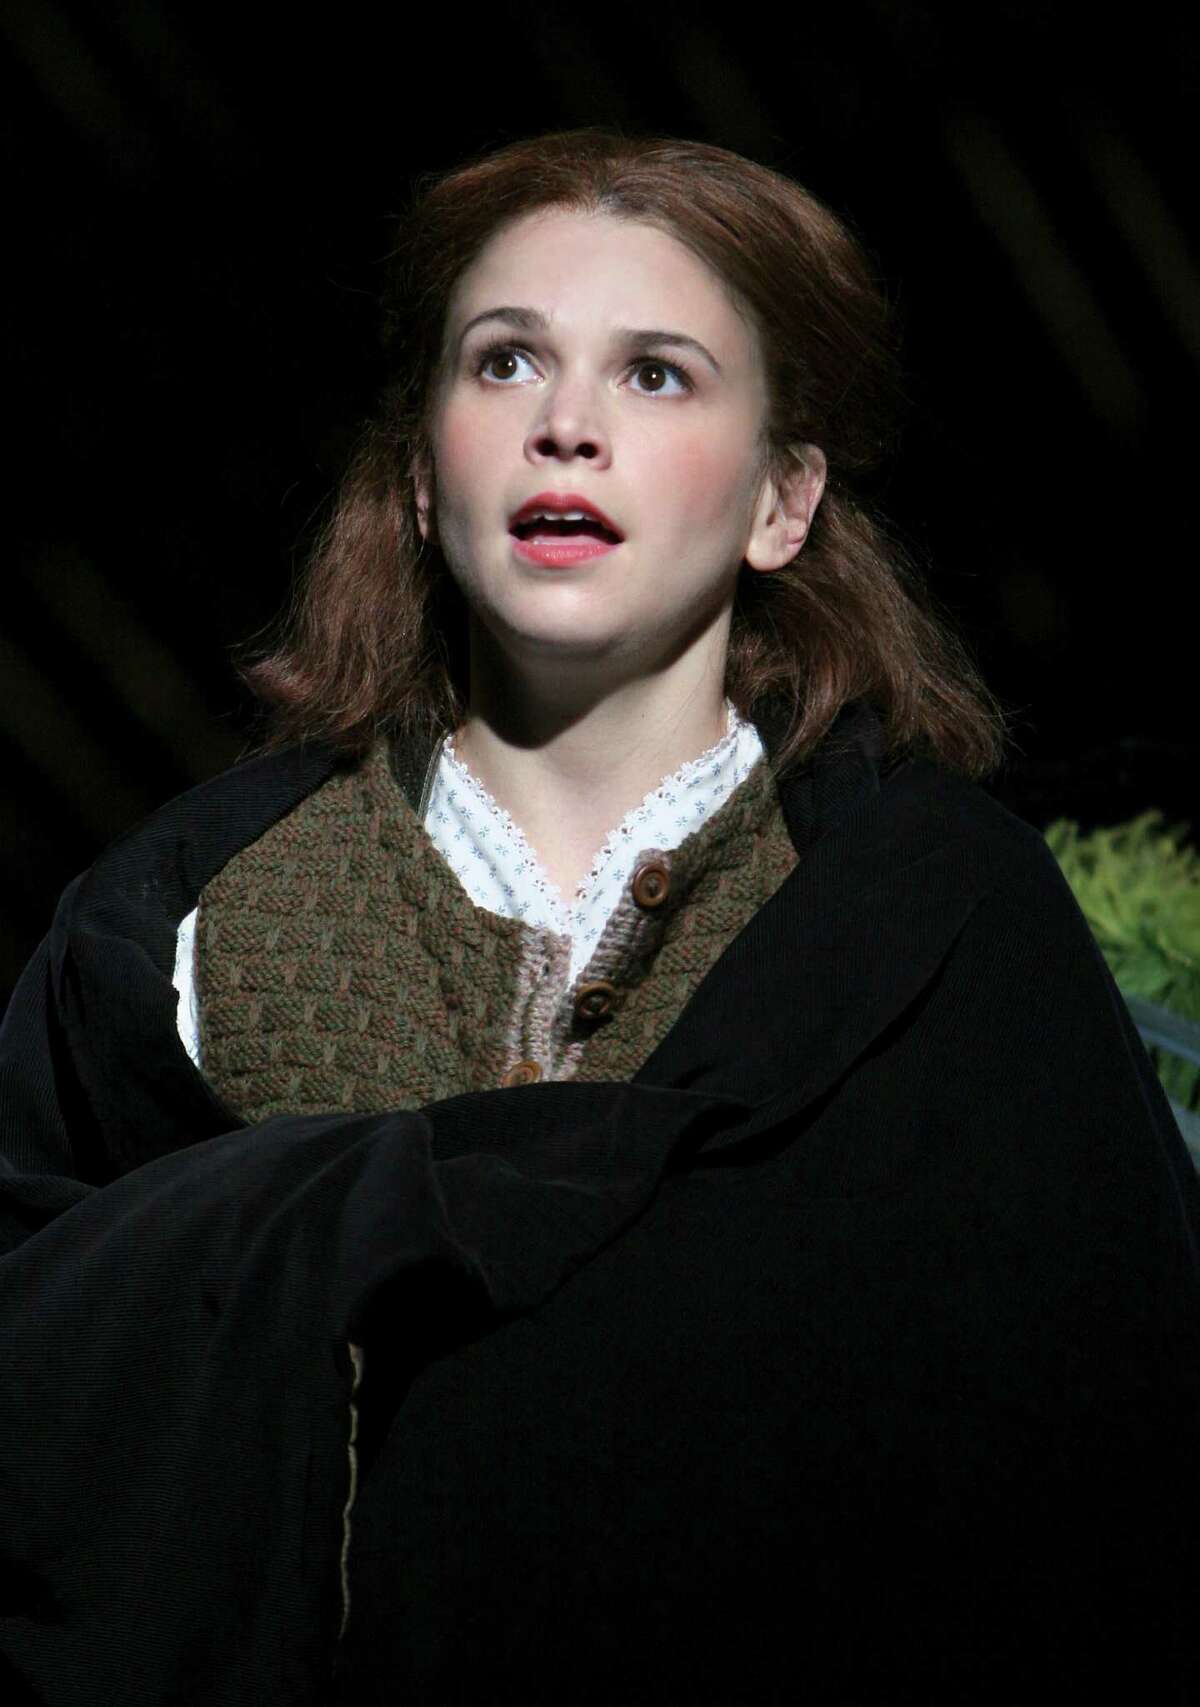 Sutton Foster in Little Women, the Musical. October 12, 2004, NYC. Credit Photo Paul Kolnik